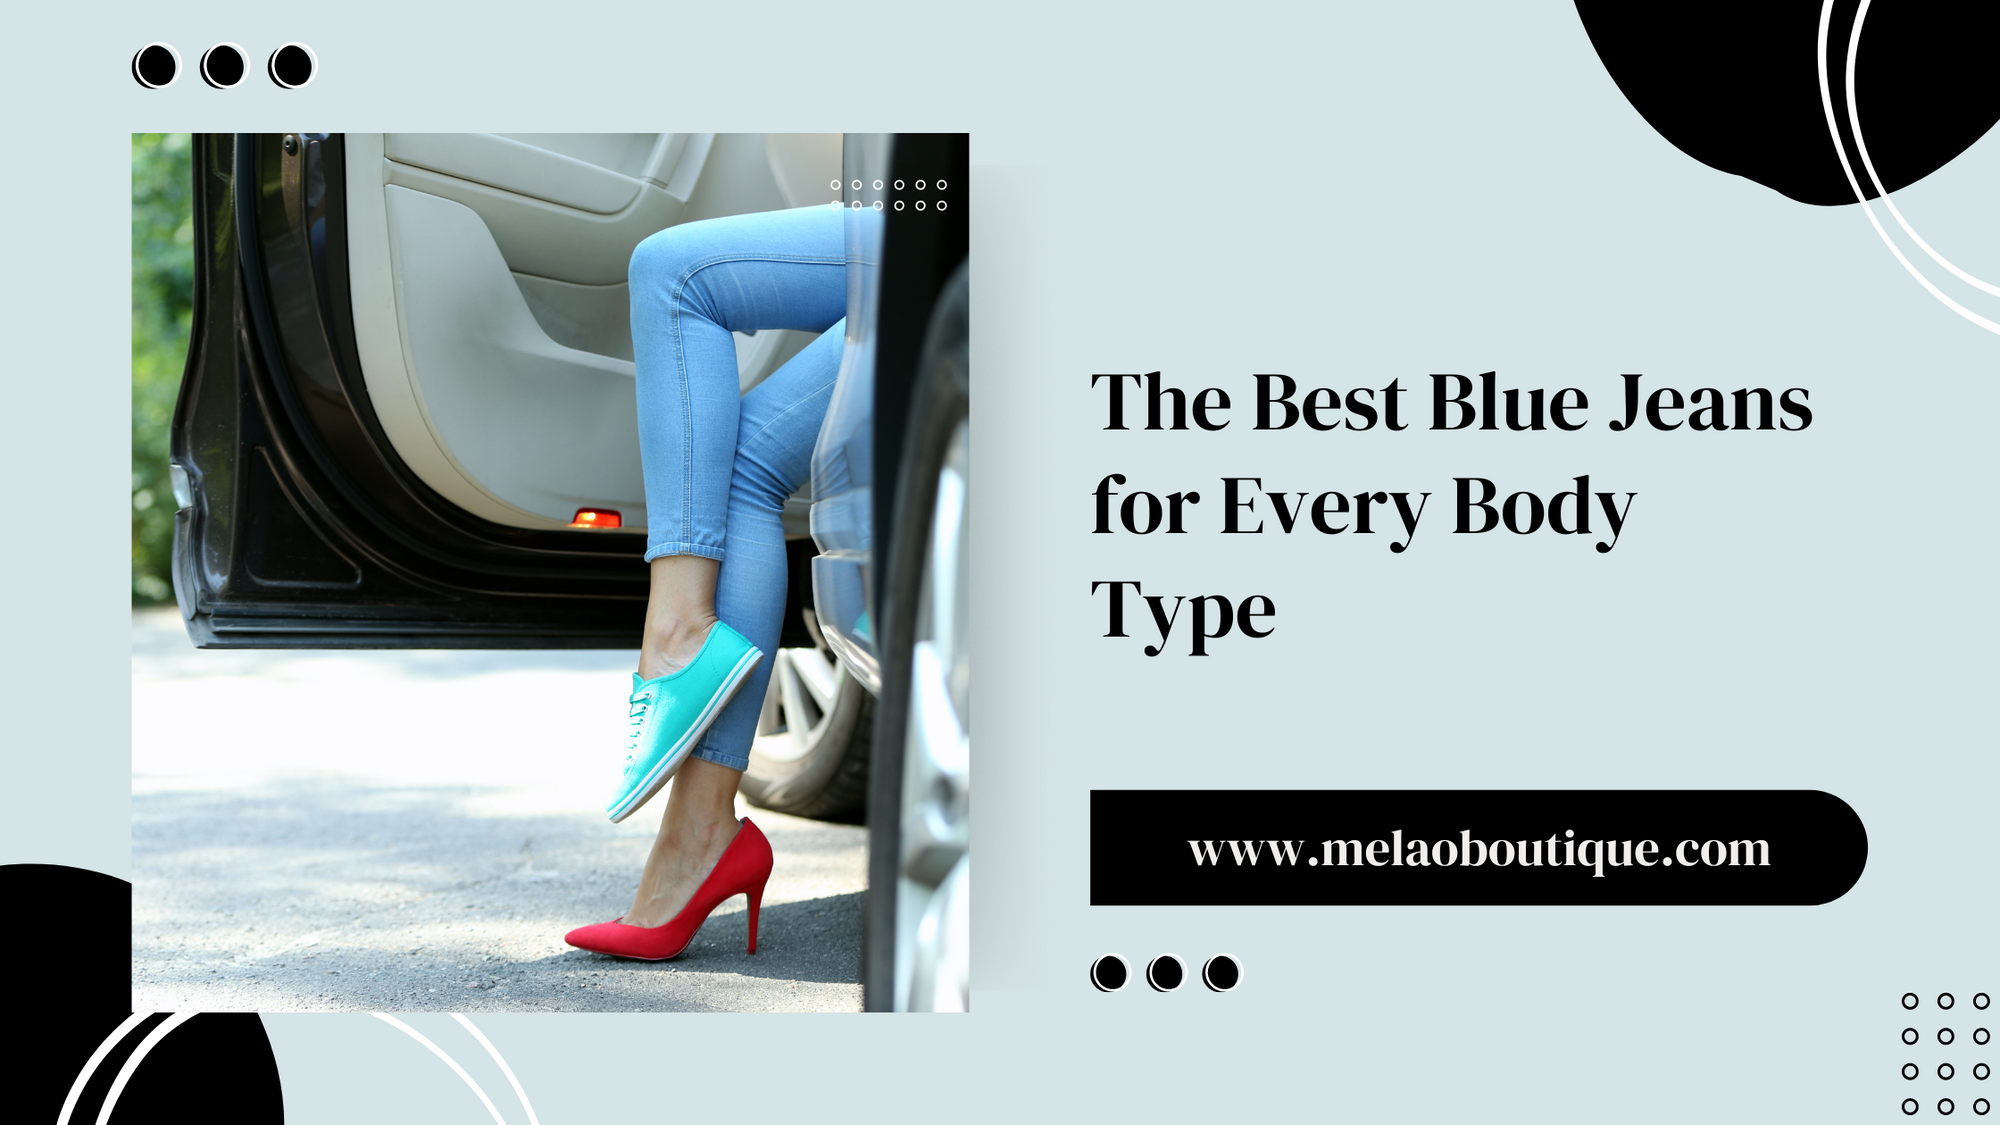 The Best Blue Jeans for Every Body Type